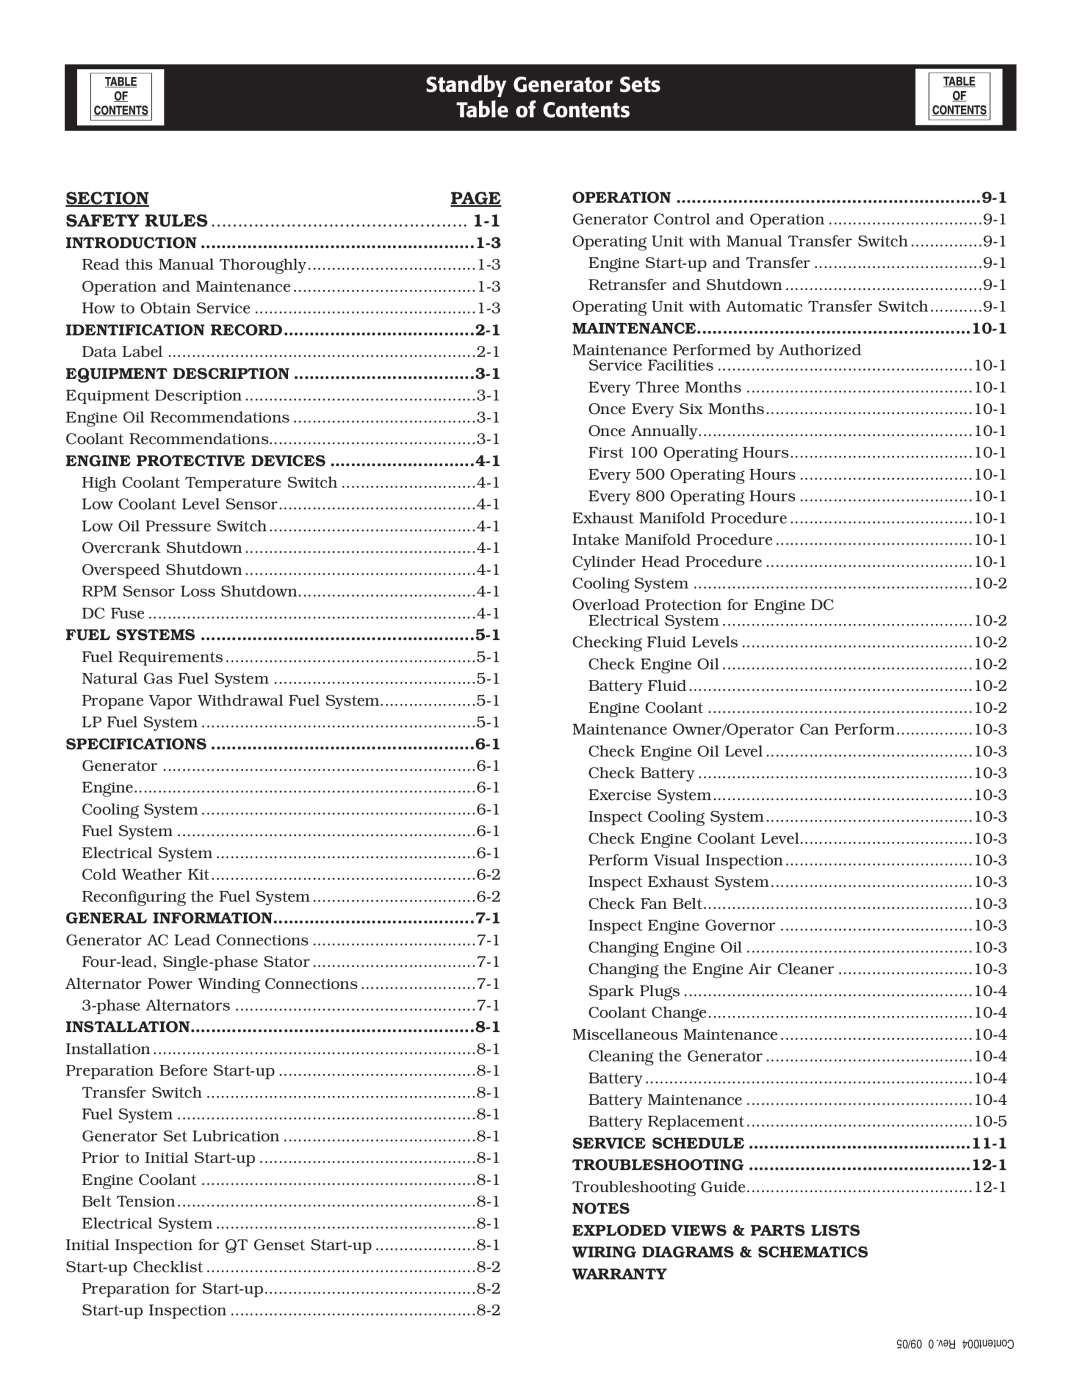 Grandstream Networks 005261-0 owner manual Standby Generator Sets Table of Contents, Section, Page, Safety Rules 